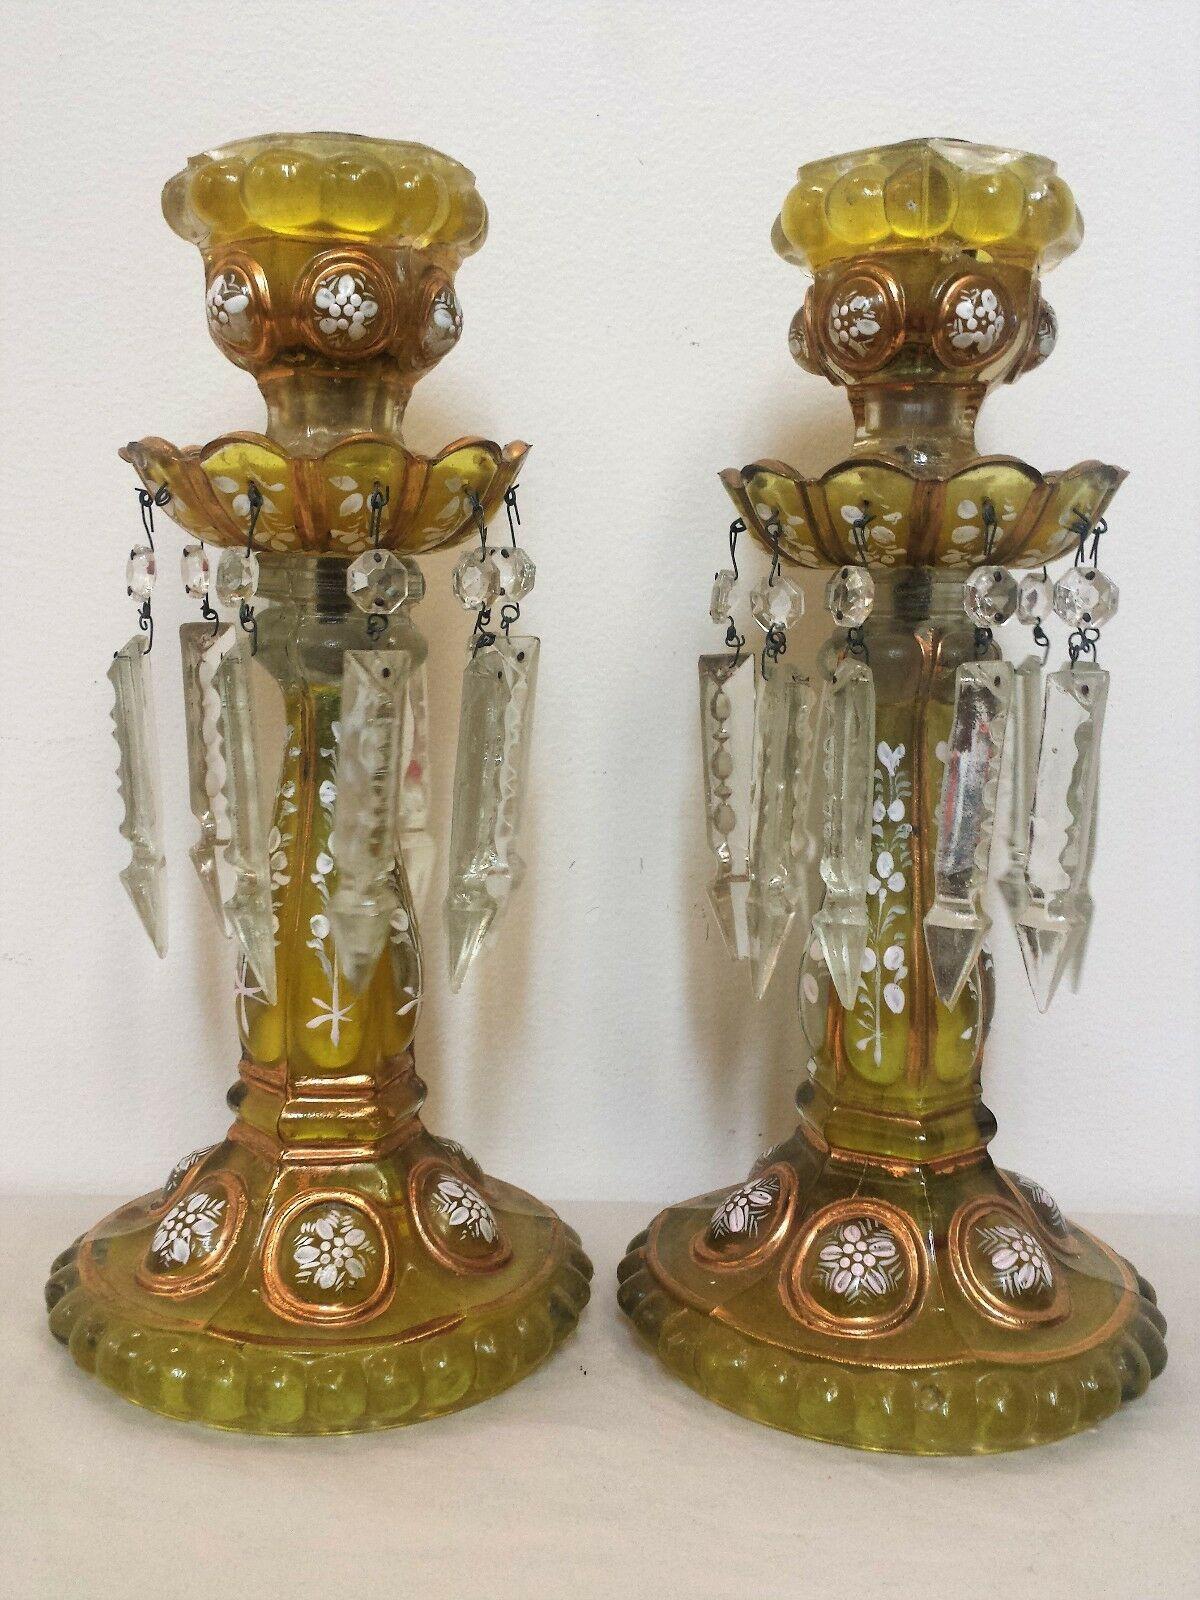 Pair 19thc French Napoleon III Candlesticks by Baccarat France. Moulded glass in an amber tone. Enamel floral work. This color is scarce. Baccarat Medallion Series.